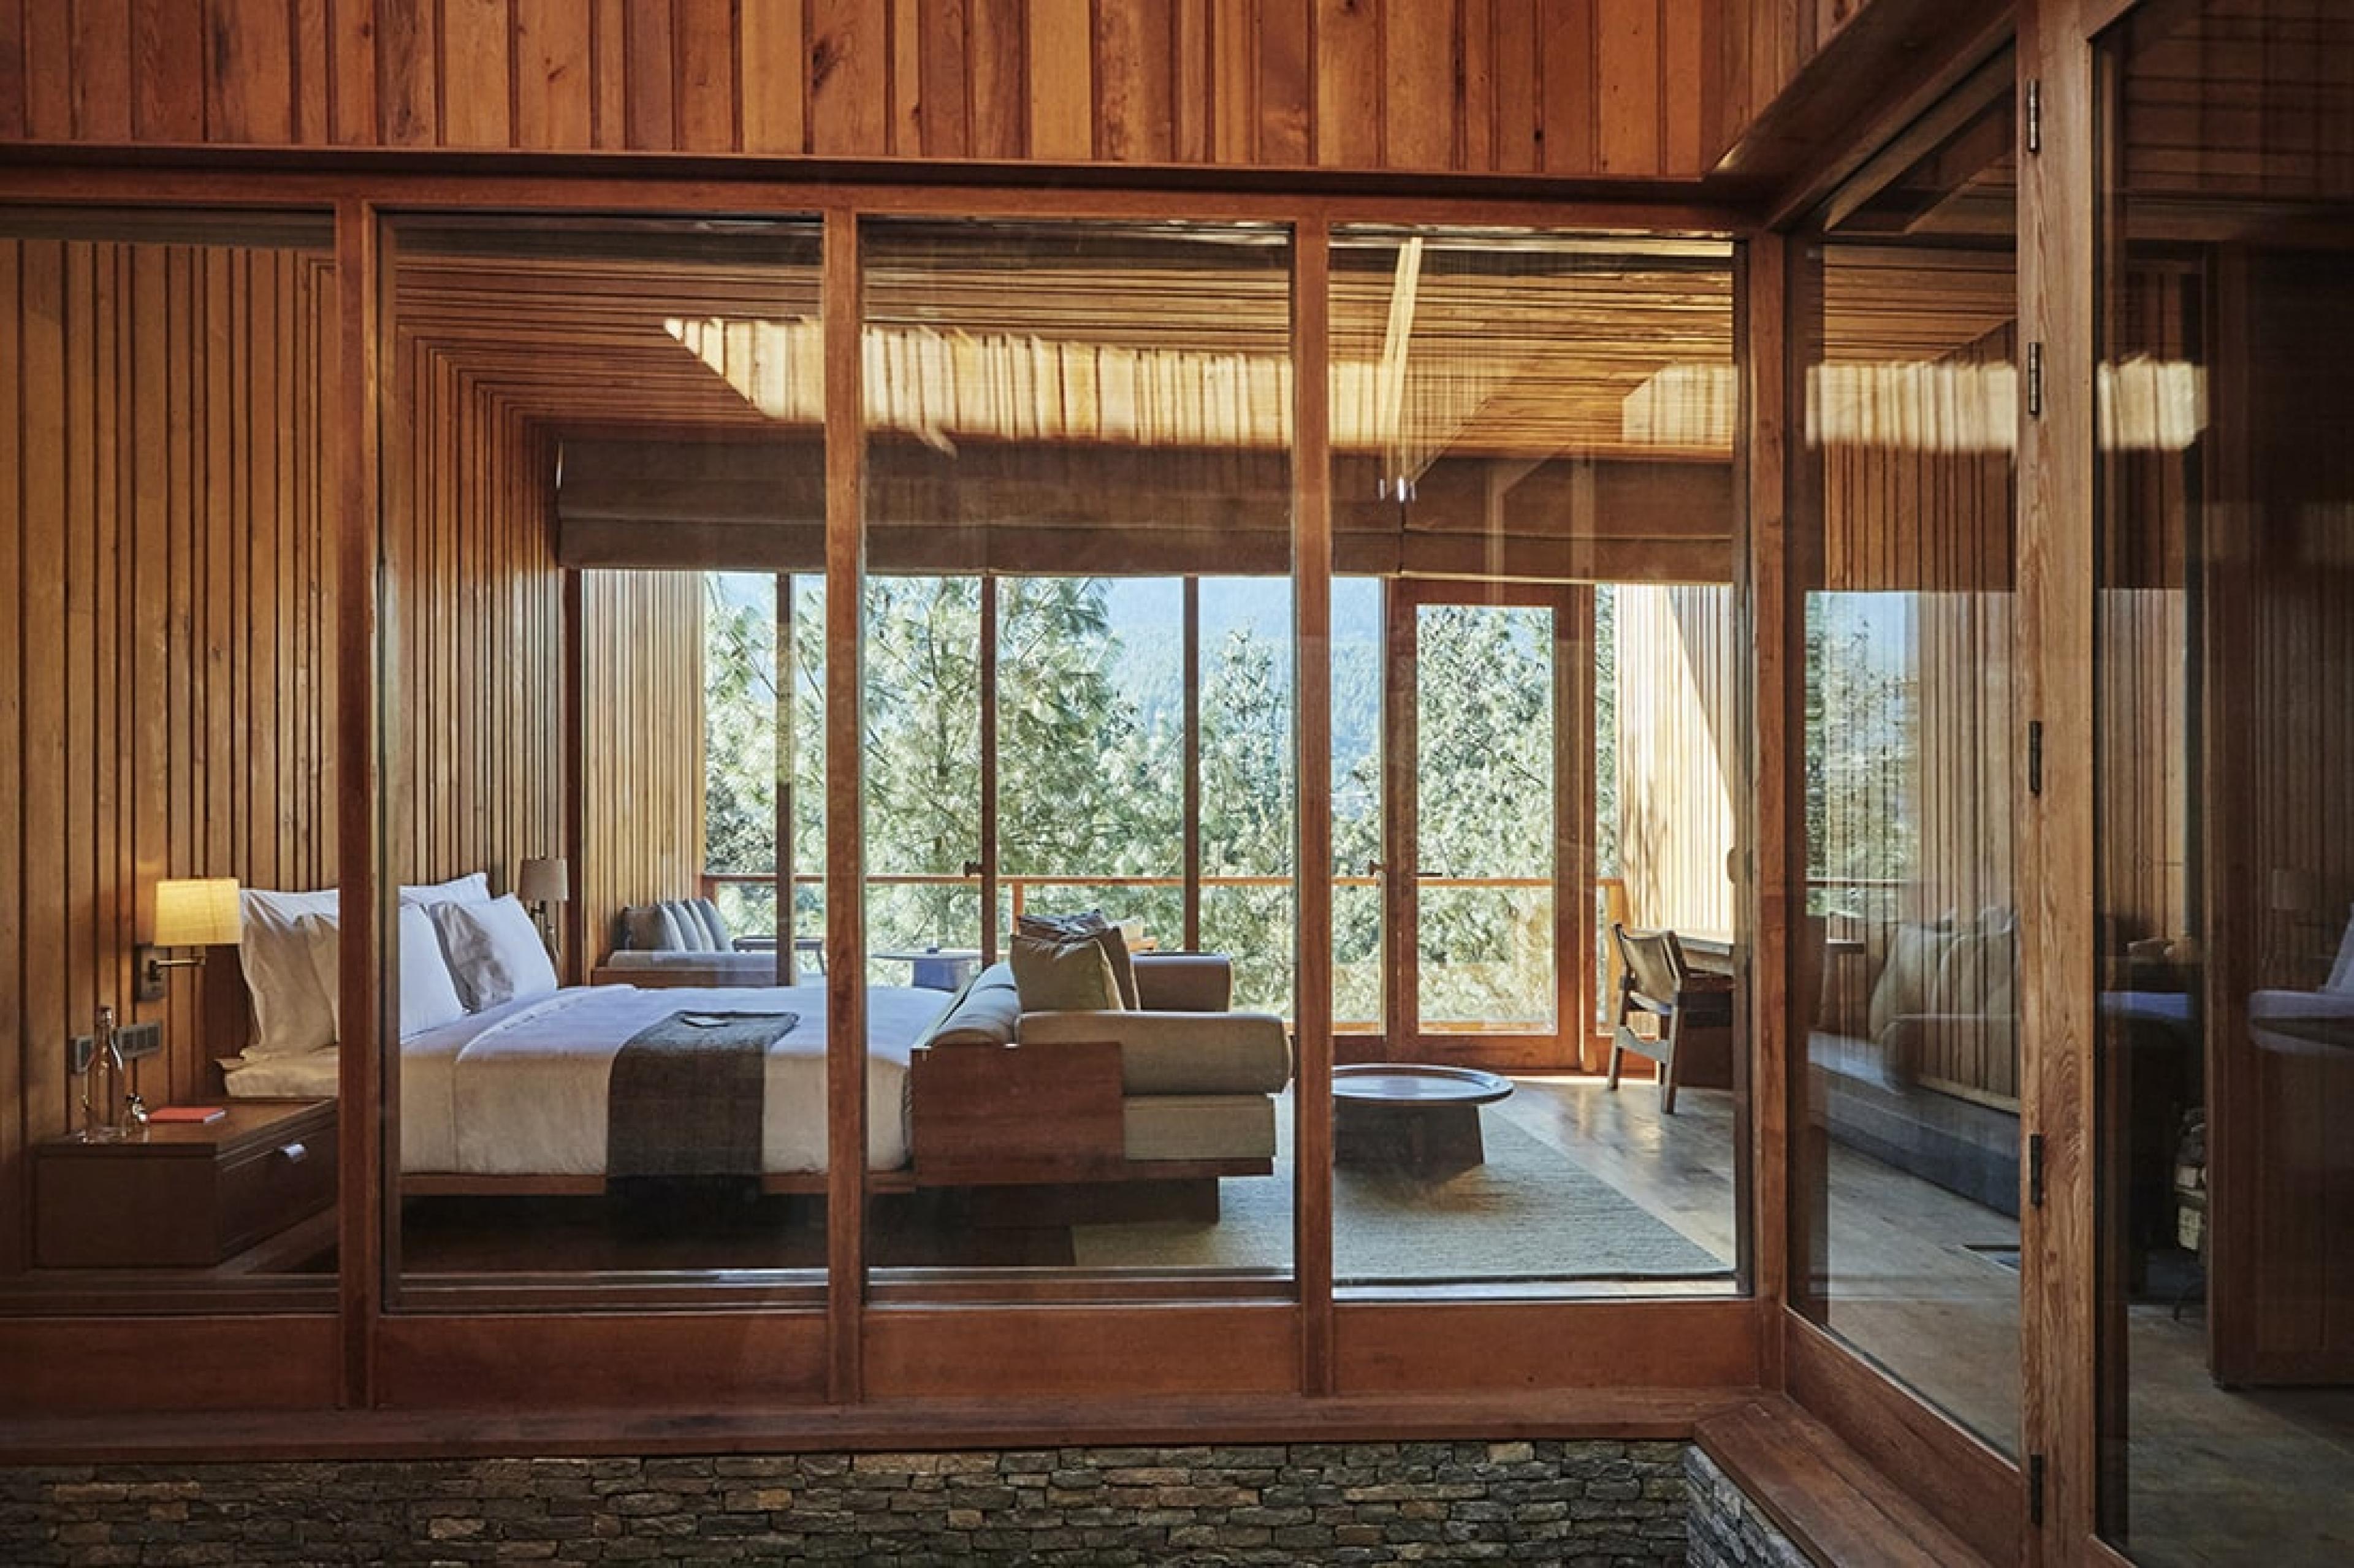 suite with wood paneling on wlls and bed on raised platform with view of trees in background